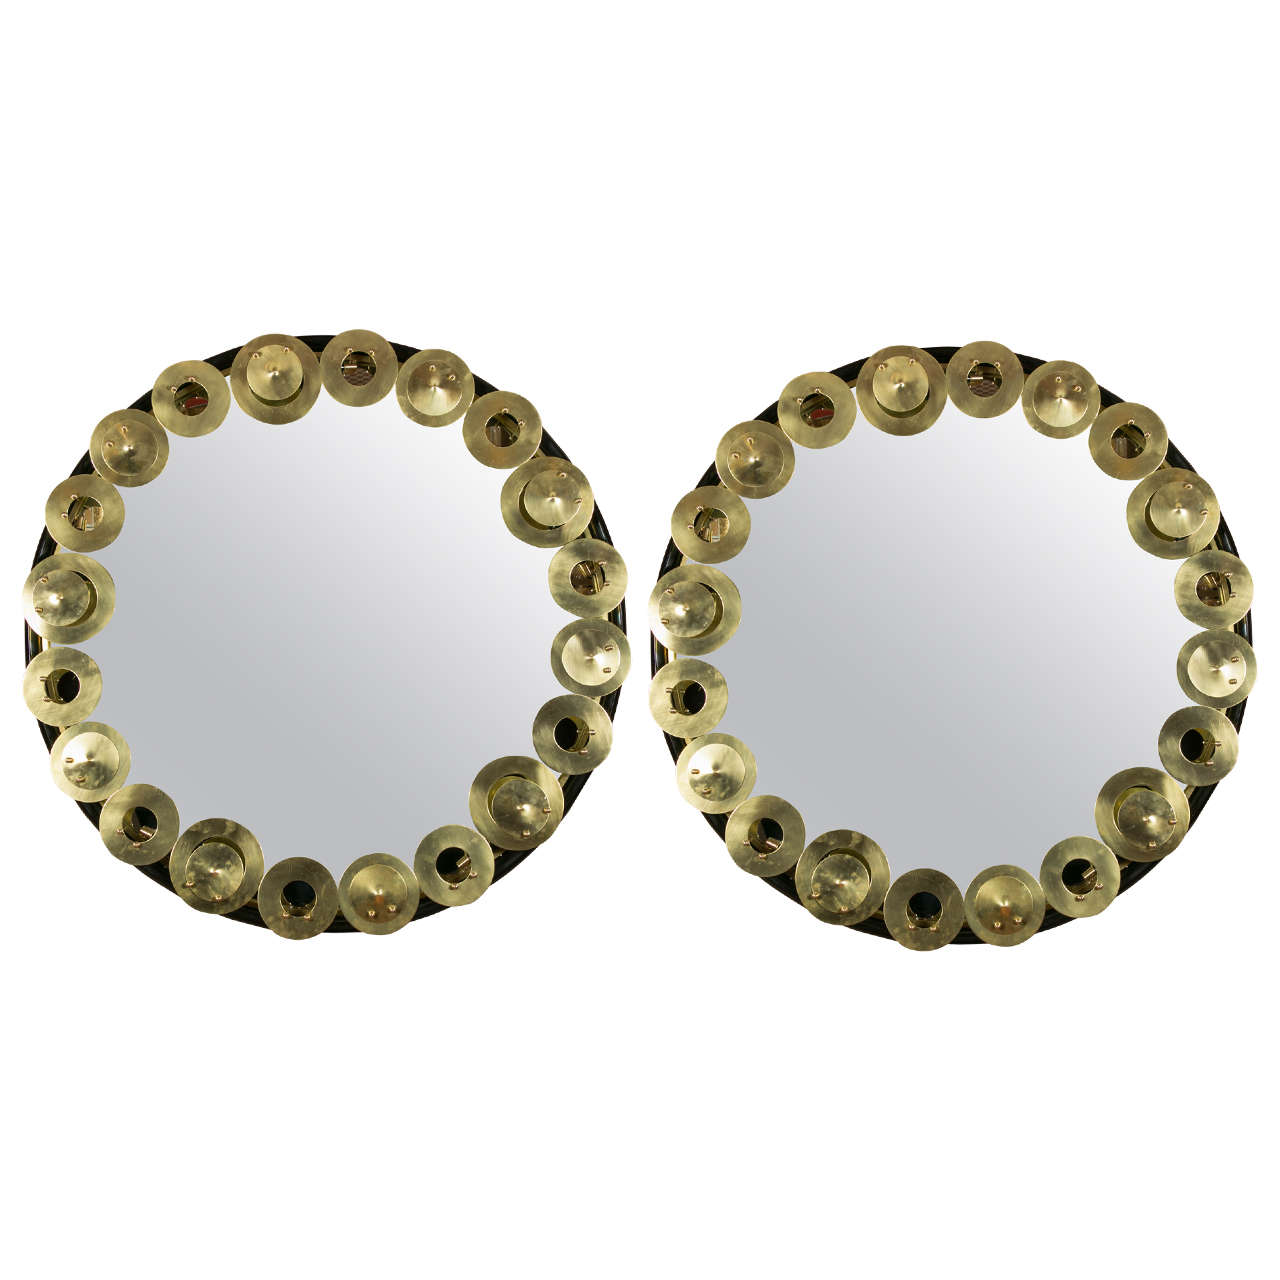  Black Wood and Brass Circular Mirrors For Sale